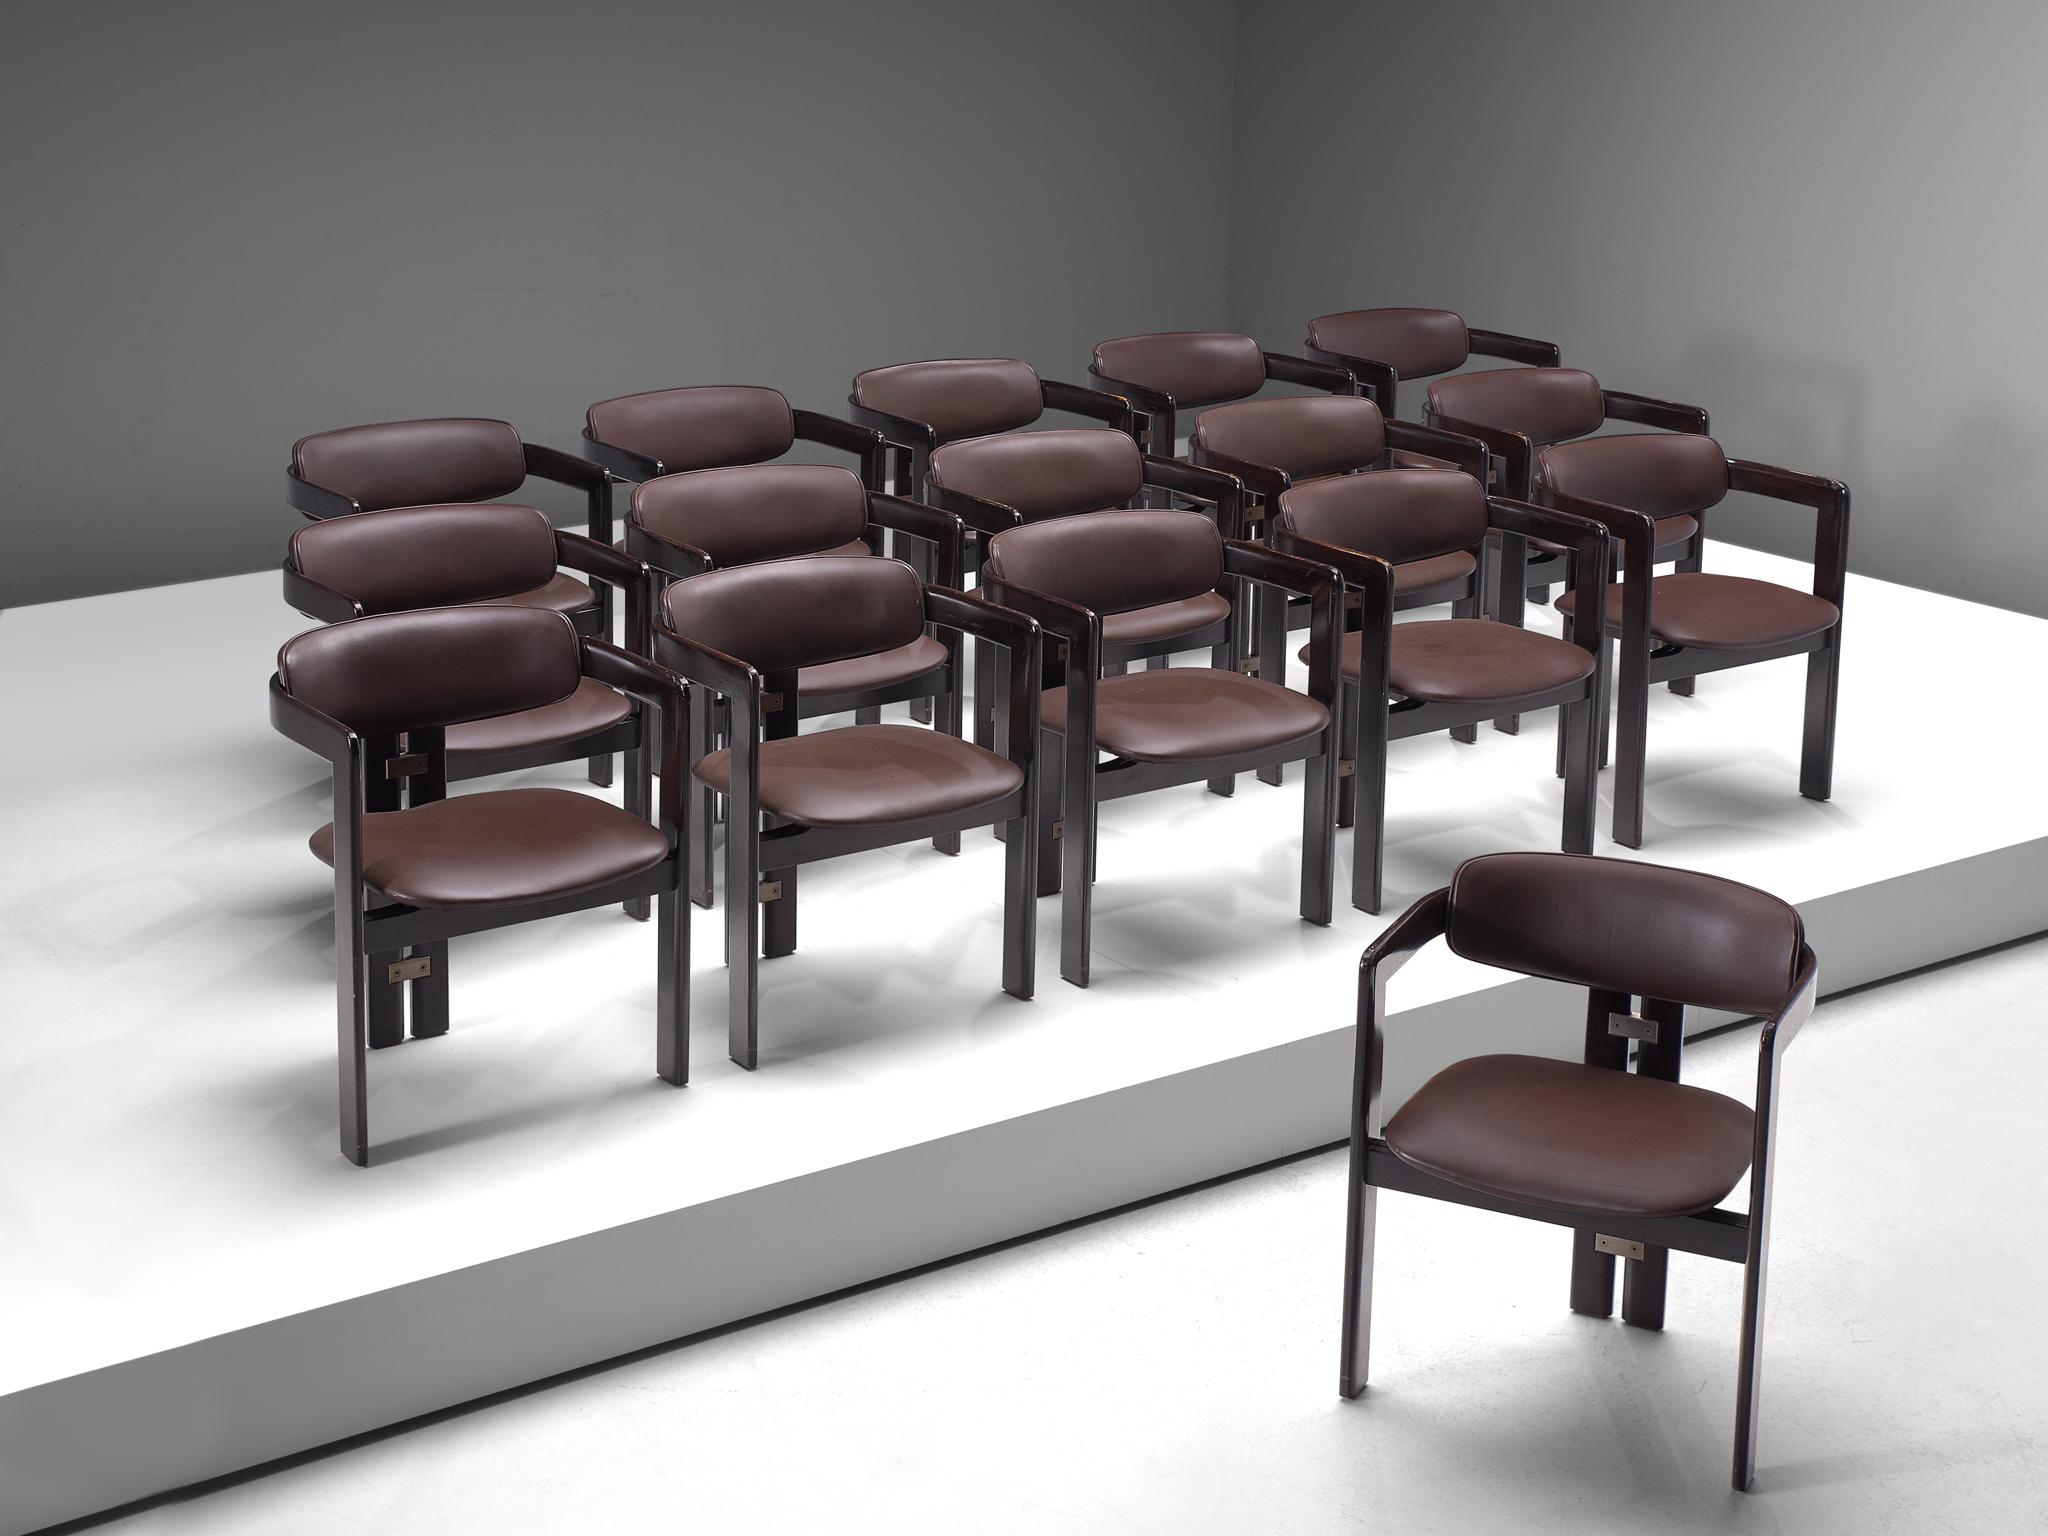 Augusto Savini for Pozzi, set of 16 ‘Pamplona’ armchairs to be reupholstered, chocolate brown leather, darkened wood, metal, Italy, 1960s.

Set of sixteen armchairs that will be customized as you desire. This example features a frame of darkened